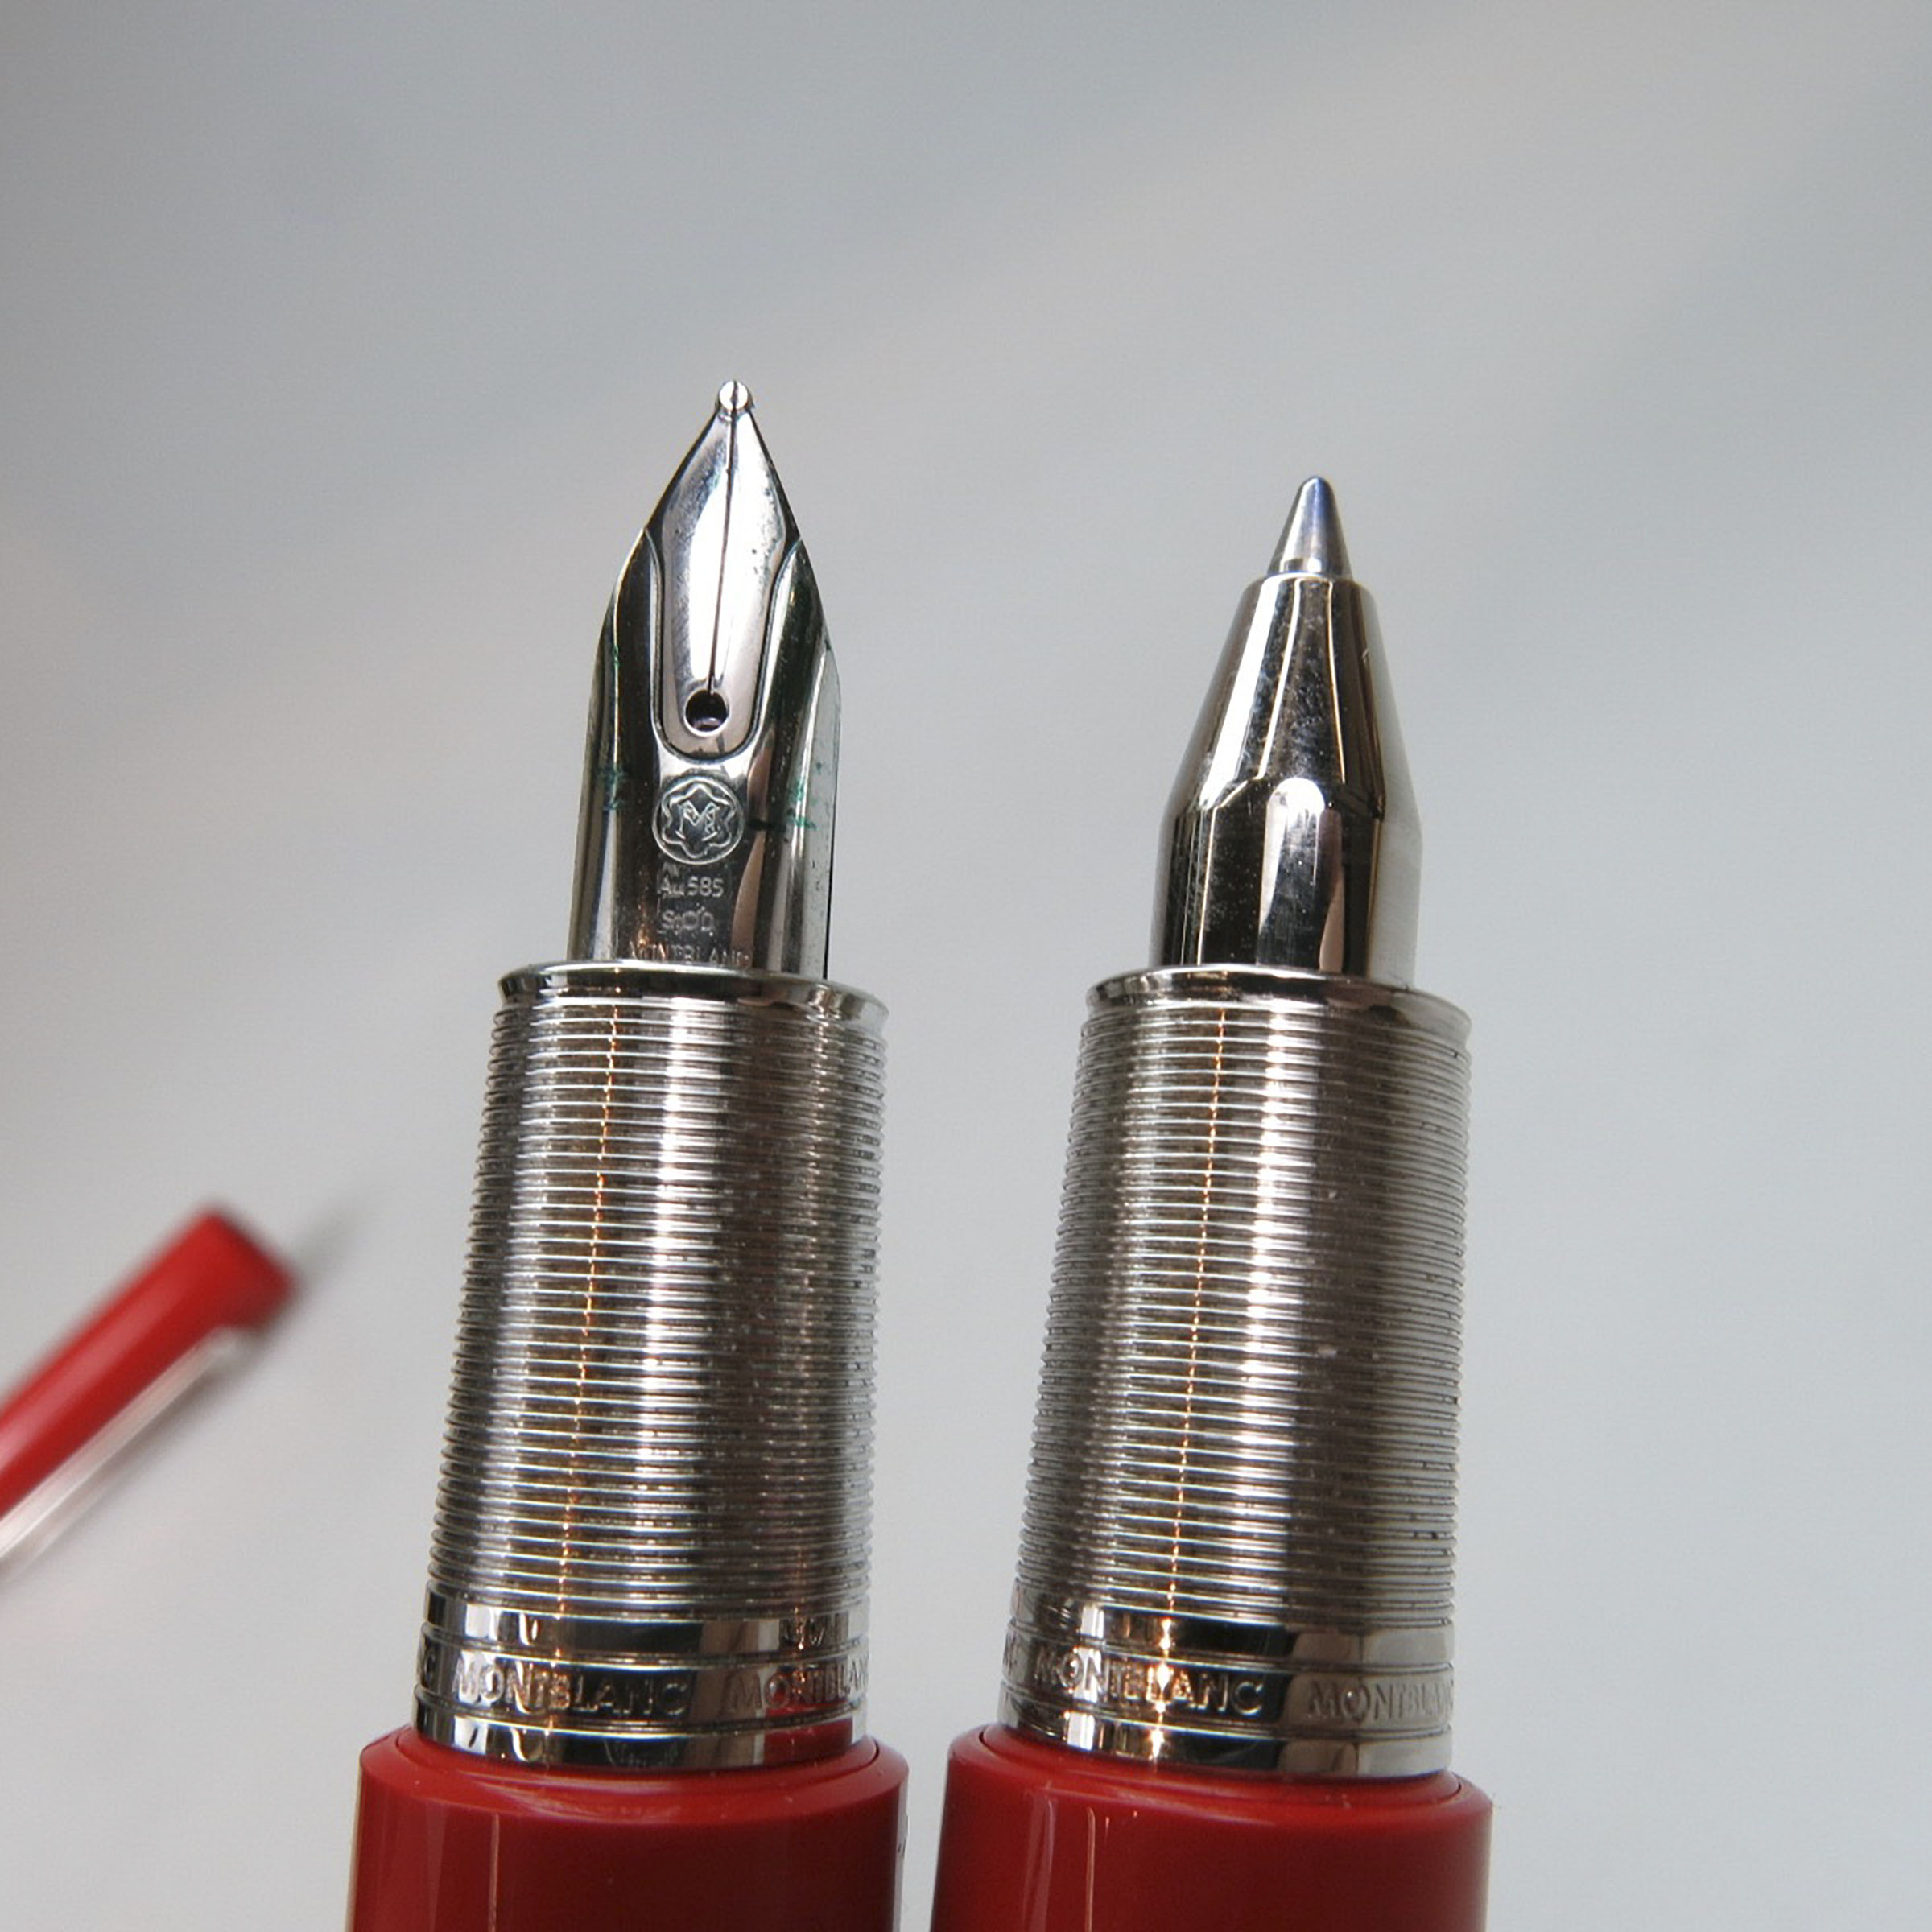 Montblanc "(Montblanc) M Red" Fountain Pen And Rollerball Pen